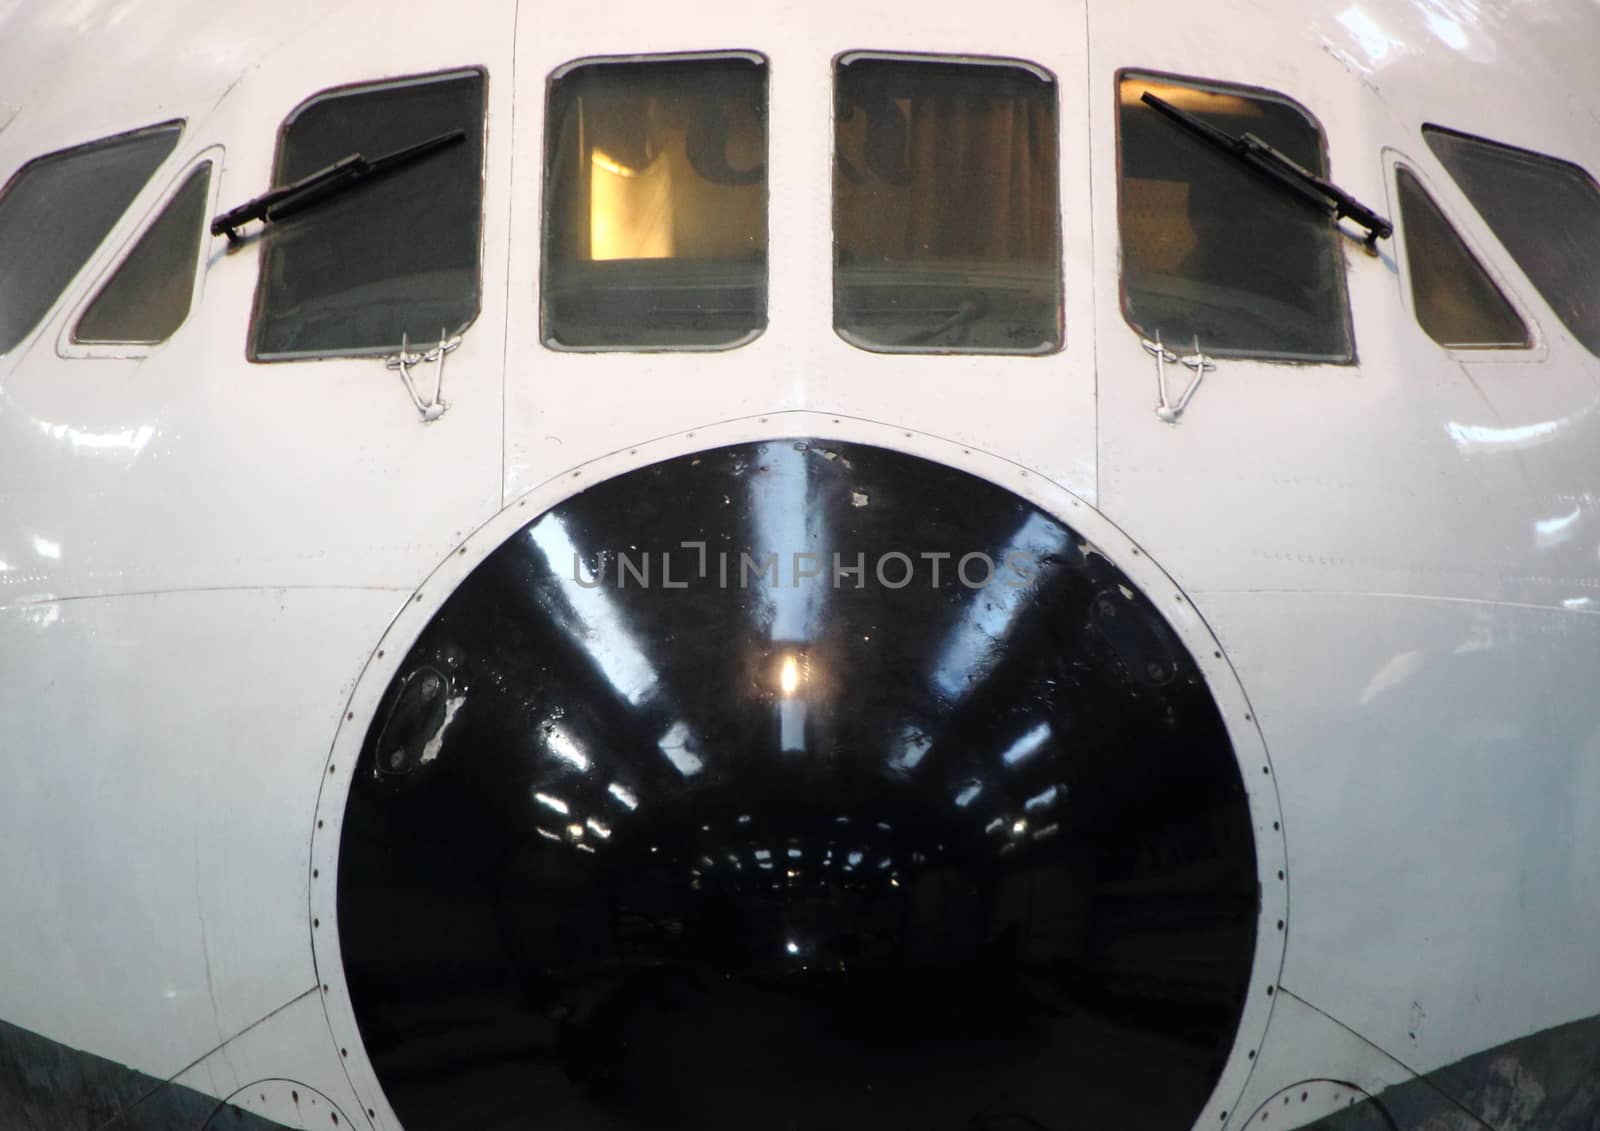 Black Nose on Old Large White Aircraft. Used in Early Danish Transportation.